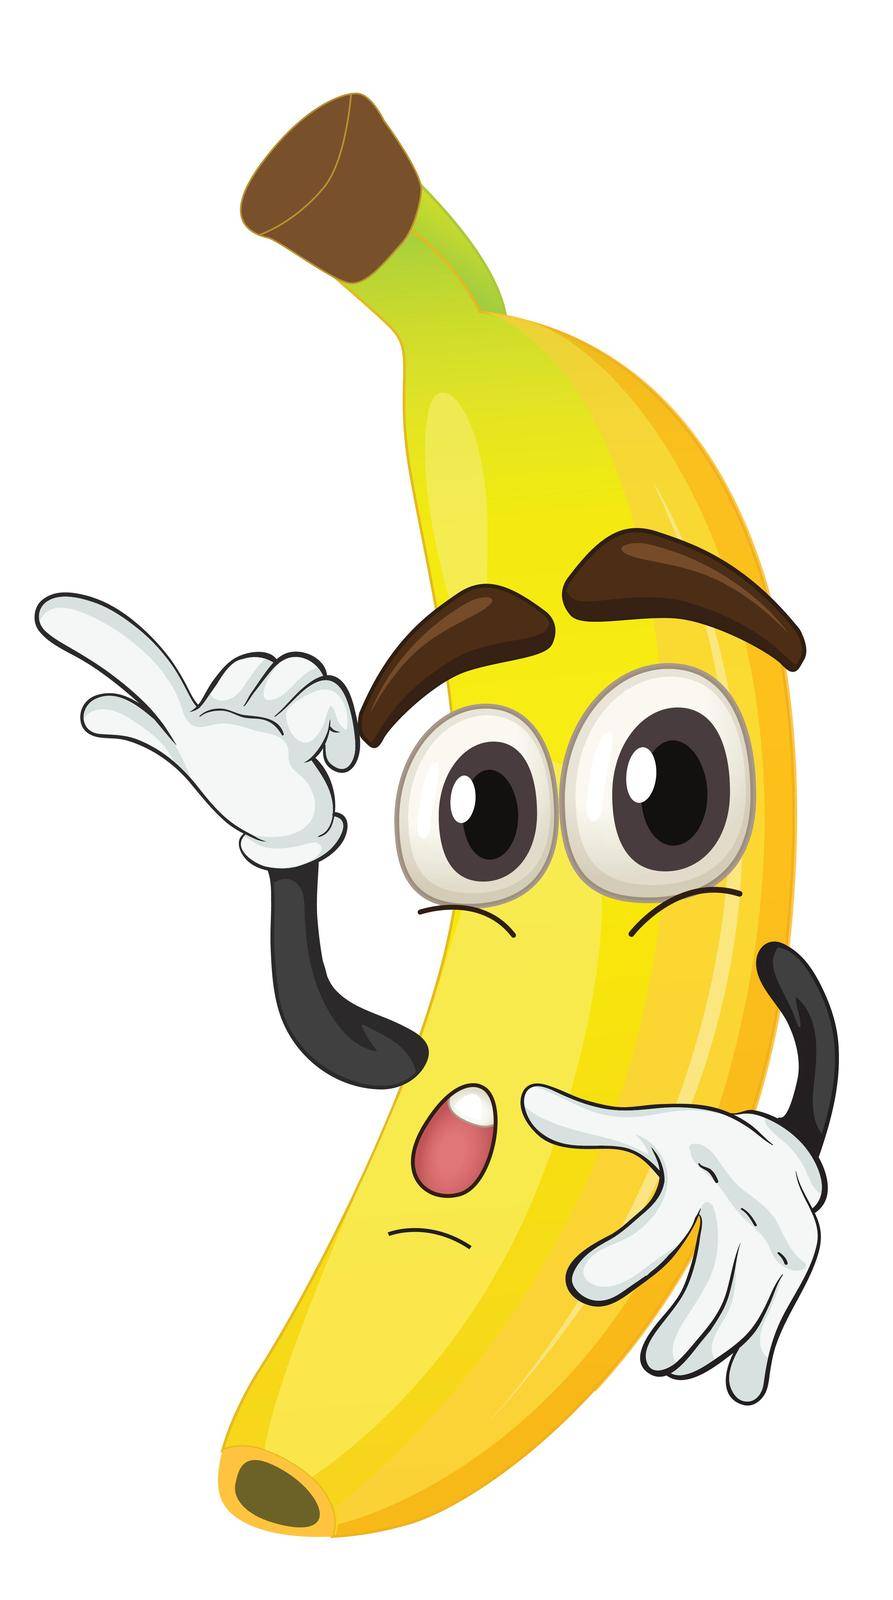 illustration of a banana on a white background